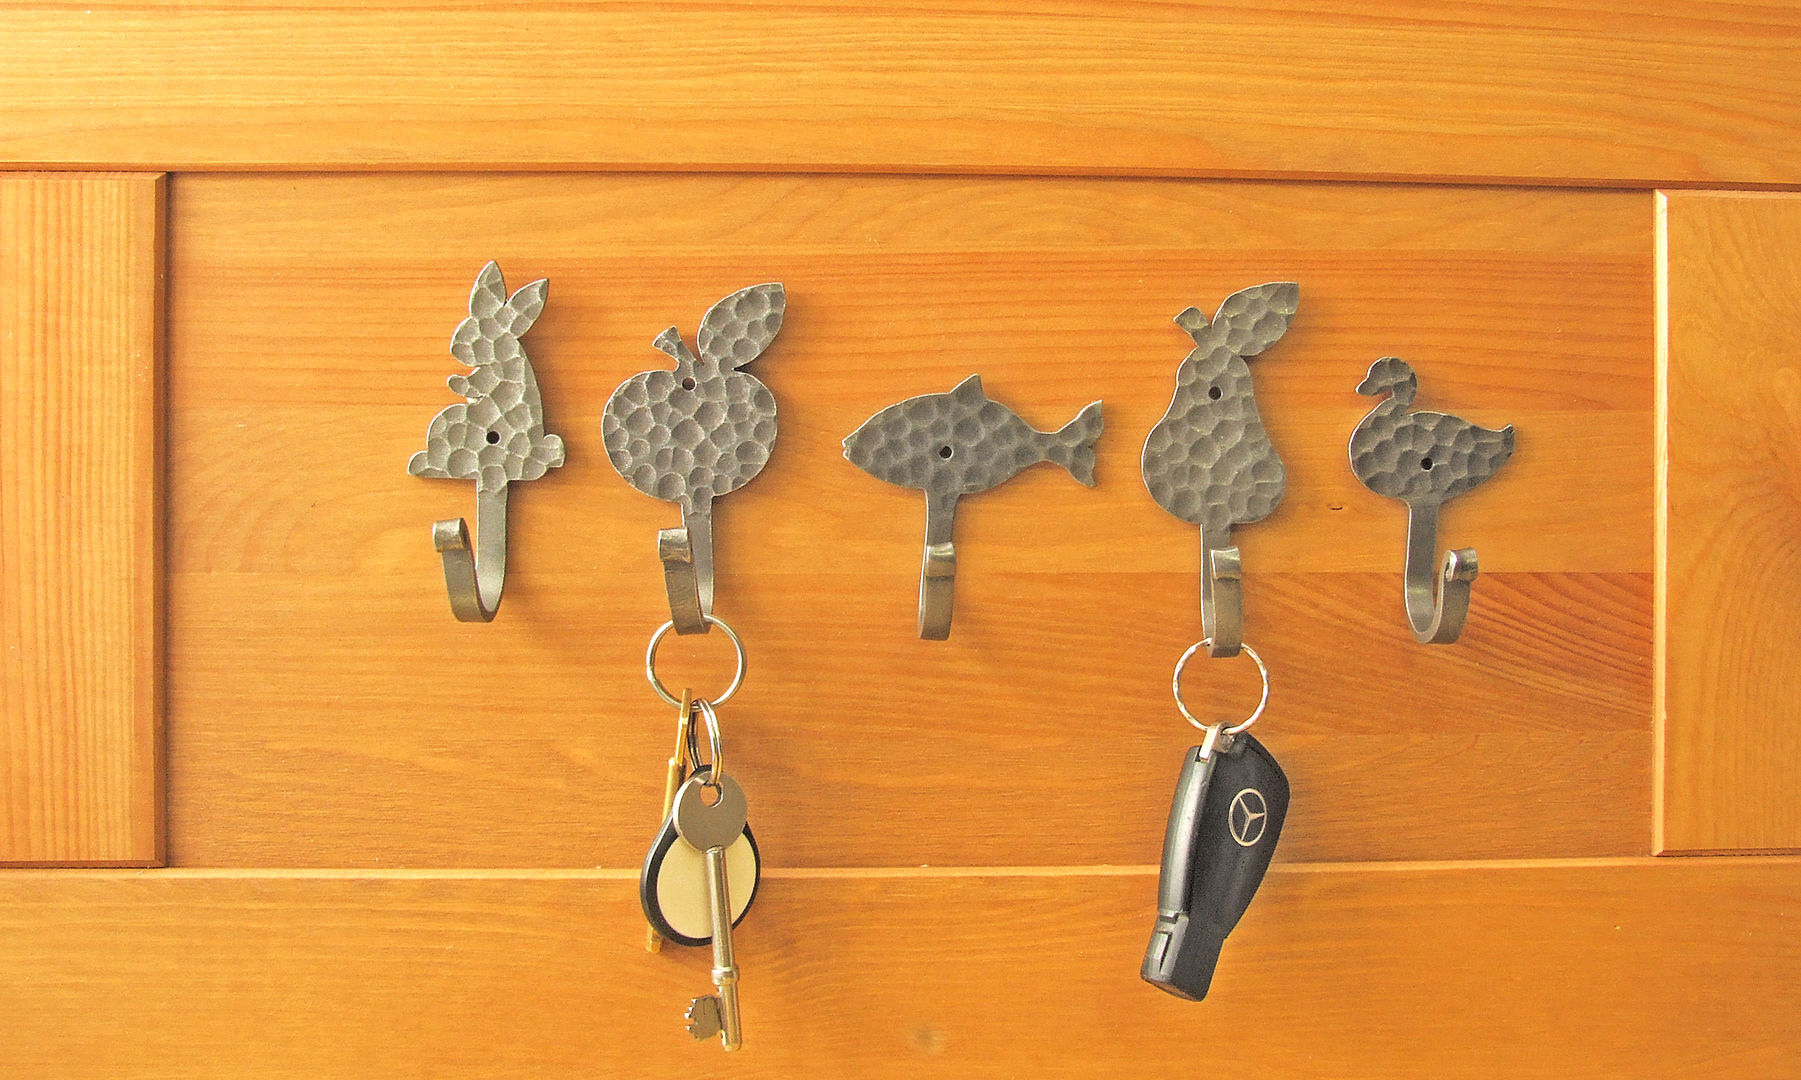 Hooks for keys or cups or for what ever you want... Clayton Munroe Eclectic style doors Iron/Steel Doorknobs & accessories